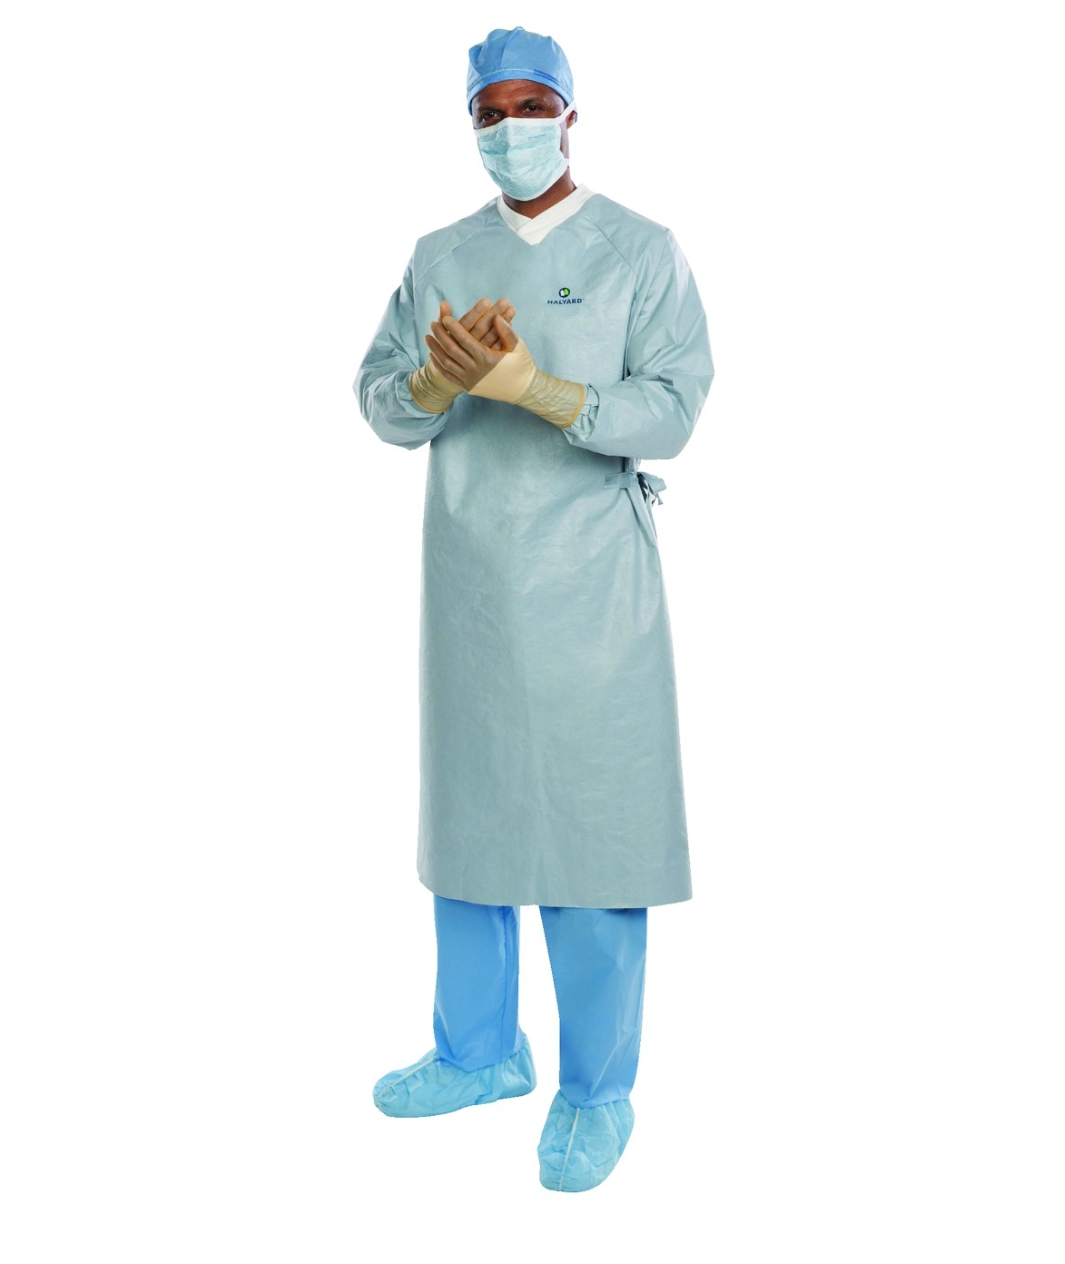 AERO CHROME Breathable Performance Surgical Gown, AMS Level 4